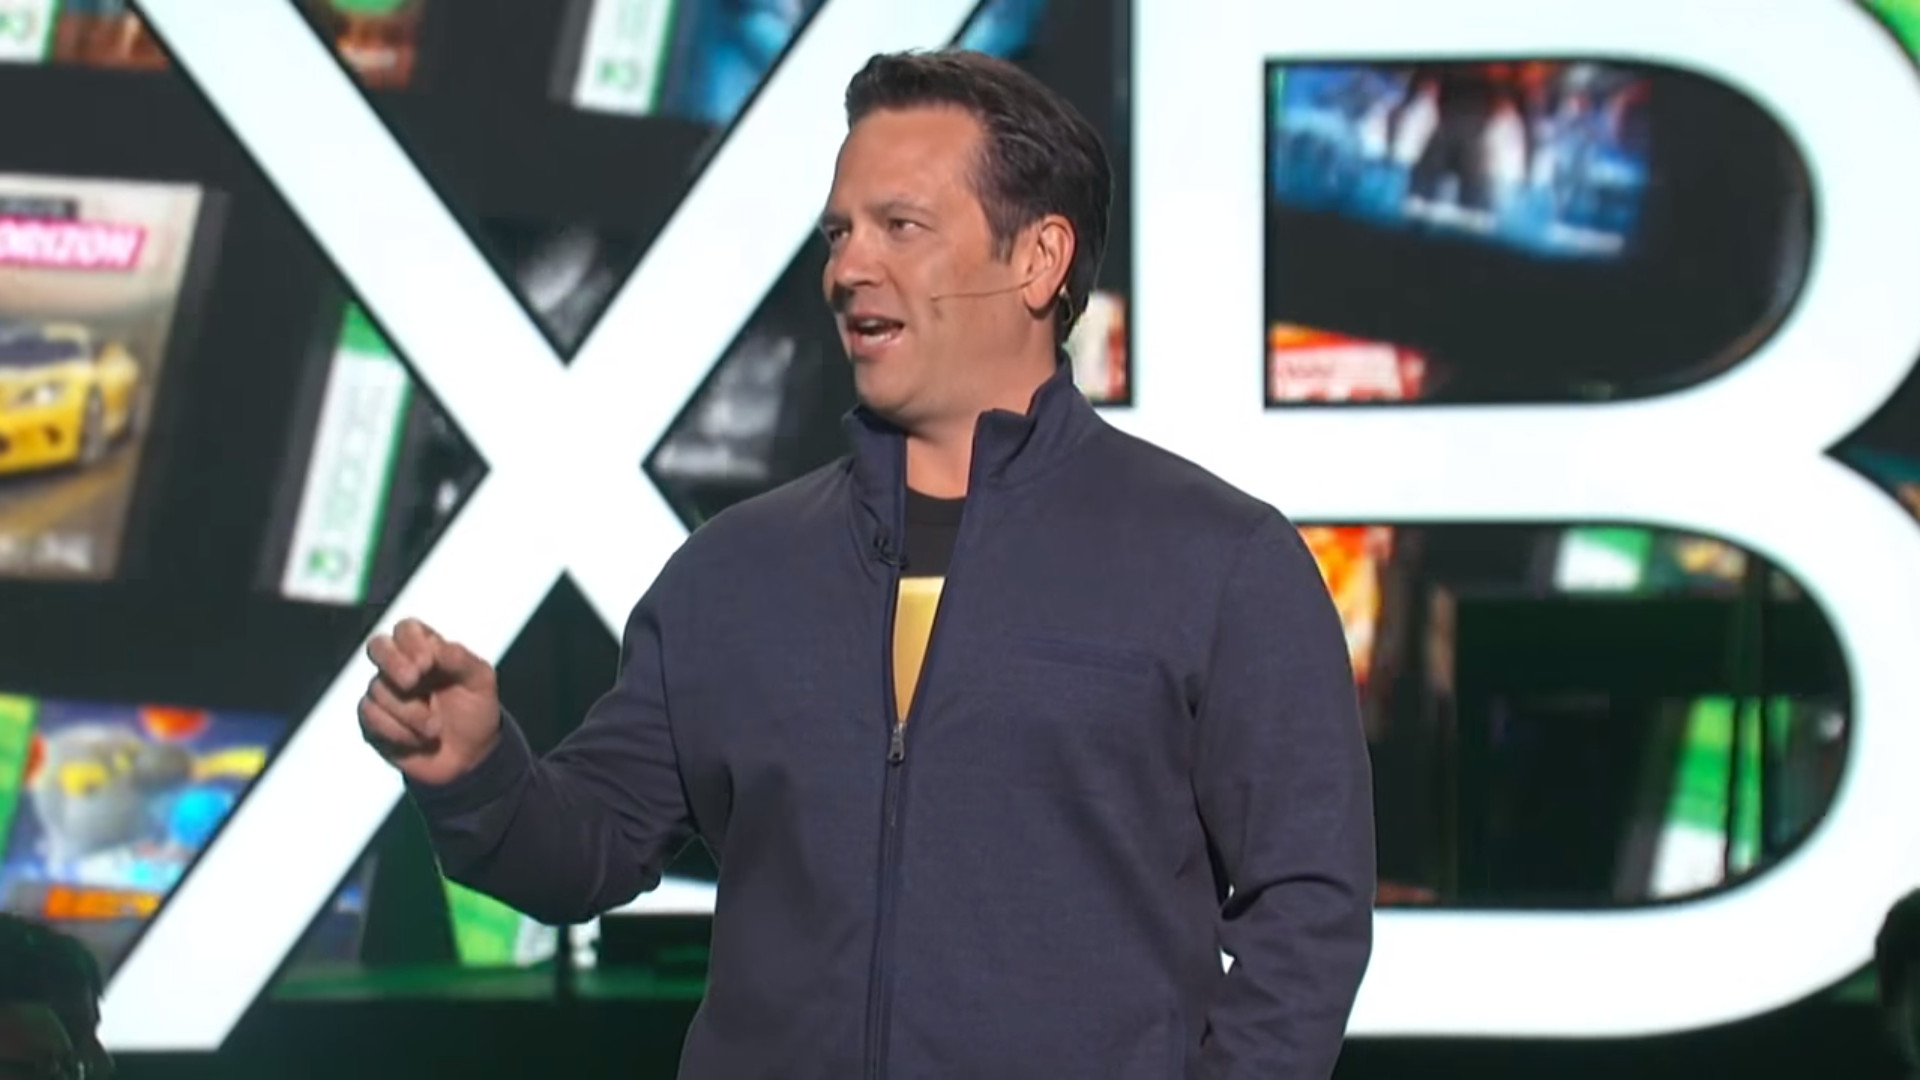 Phil Spencer Presenting at Xbox Event